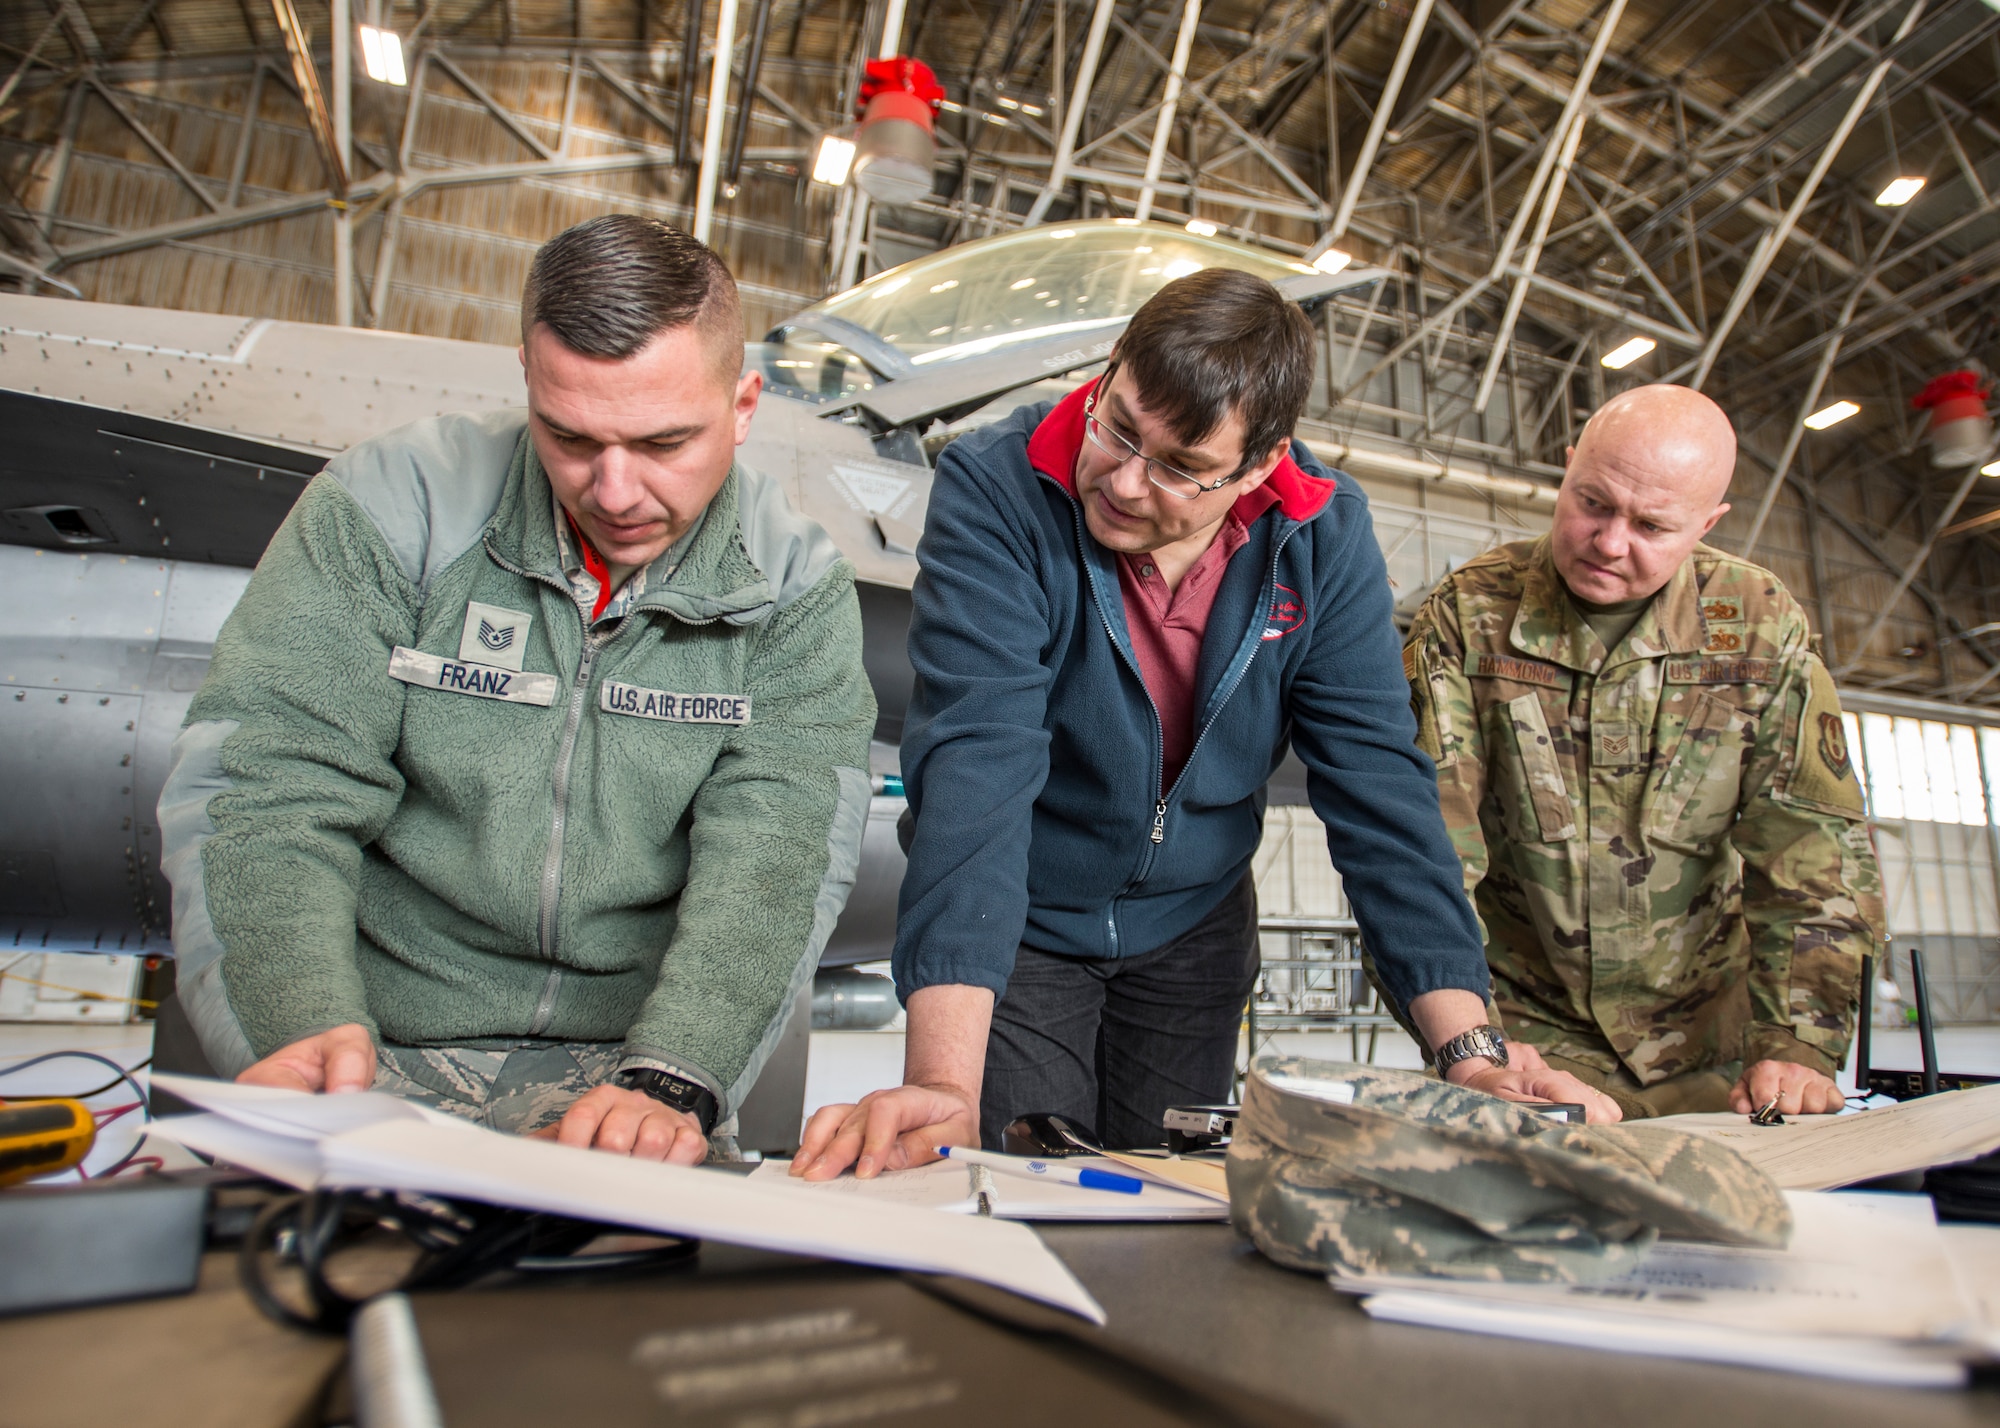 Tech. Sgt. Alex Franz, 412th Aircraft Maintenance Squadron, Martin Leduc, Technologies Harness Scanner engineer, and Staff Sgt. Jocko Hammond, 412th AMXS, review F-16 electrical wiring schematics during an Advanced Mobile Universal Electrical Tester, or AMUET, testing session at Edwards Air Force Base, California, Feb. 4. (Photo by Giancarlo Casem)